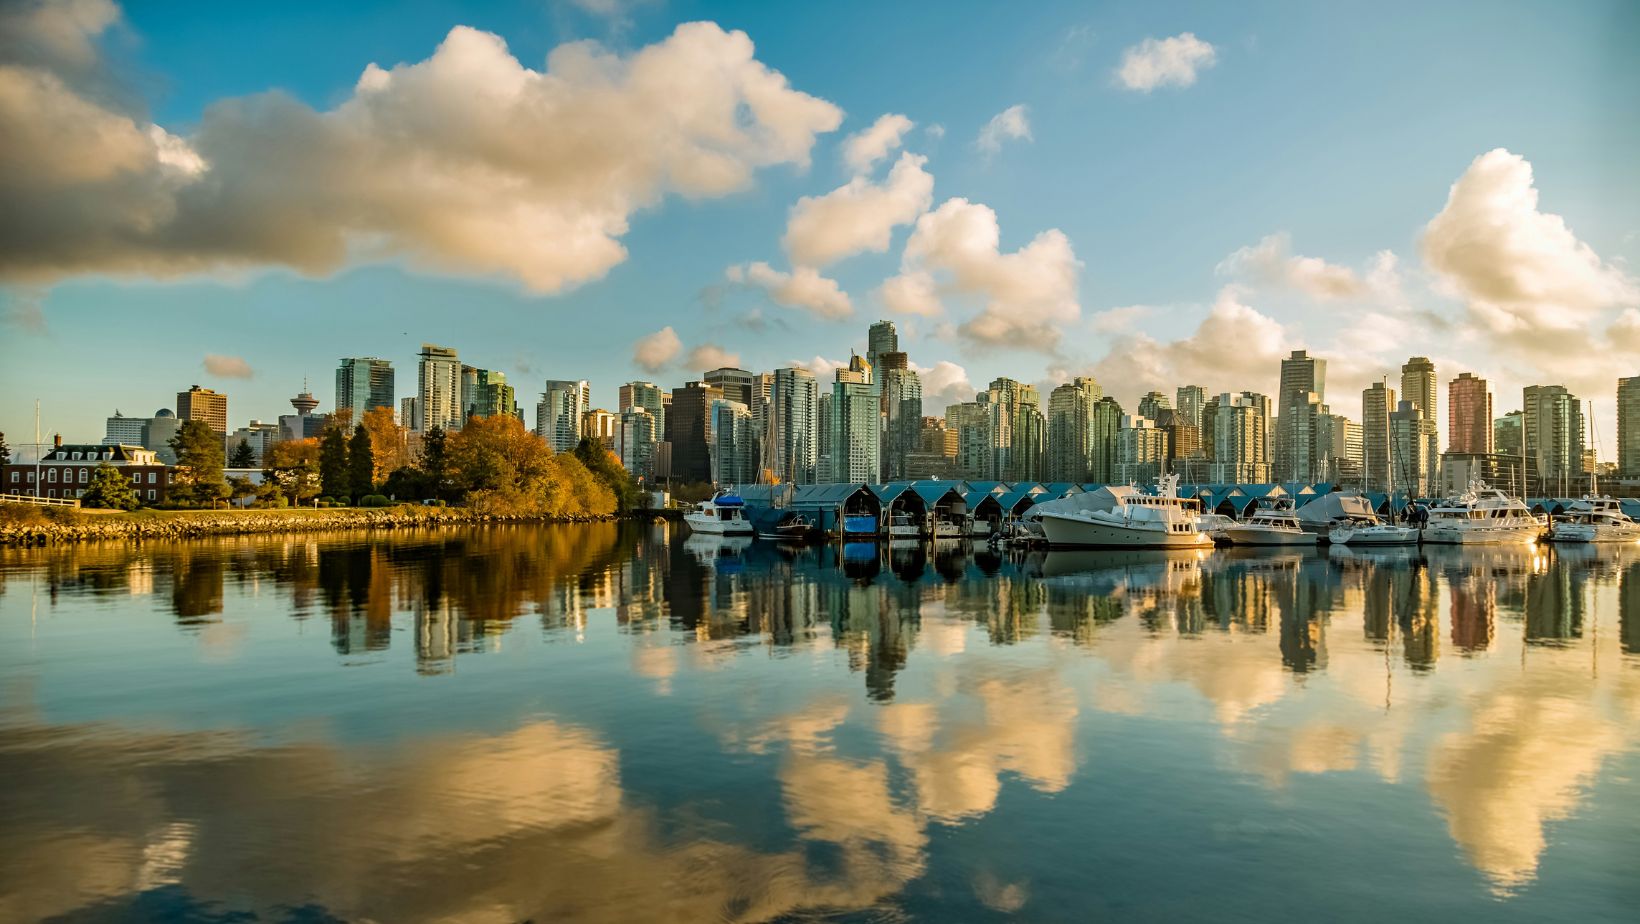 View of the skyline, buildings, skyscrapers and boats in Vancouver